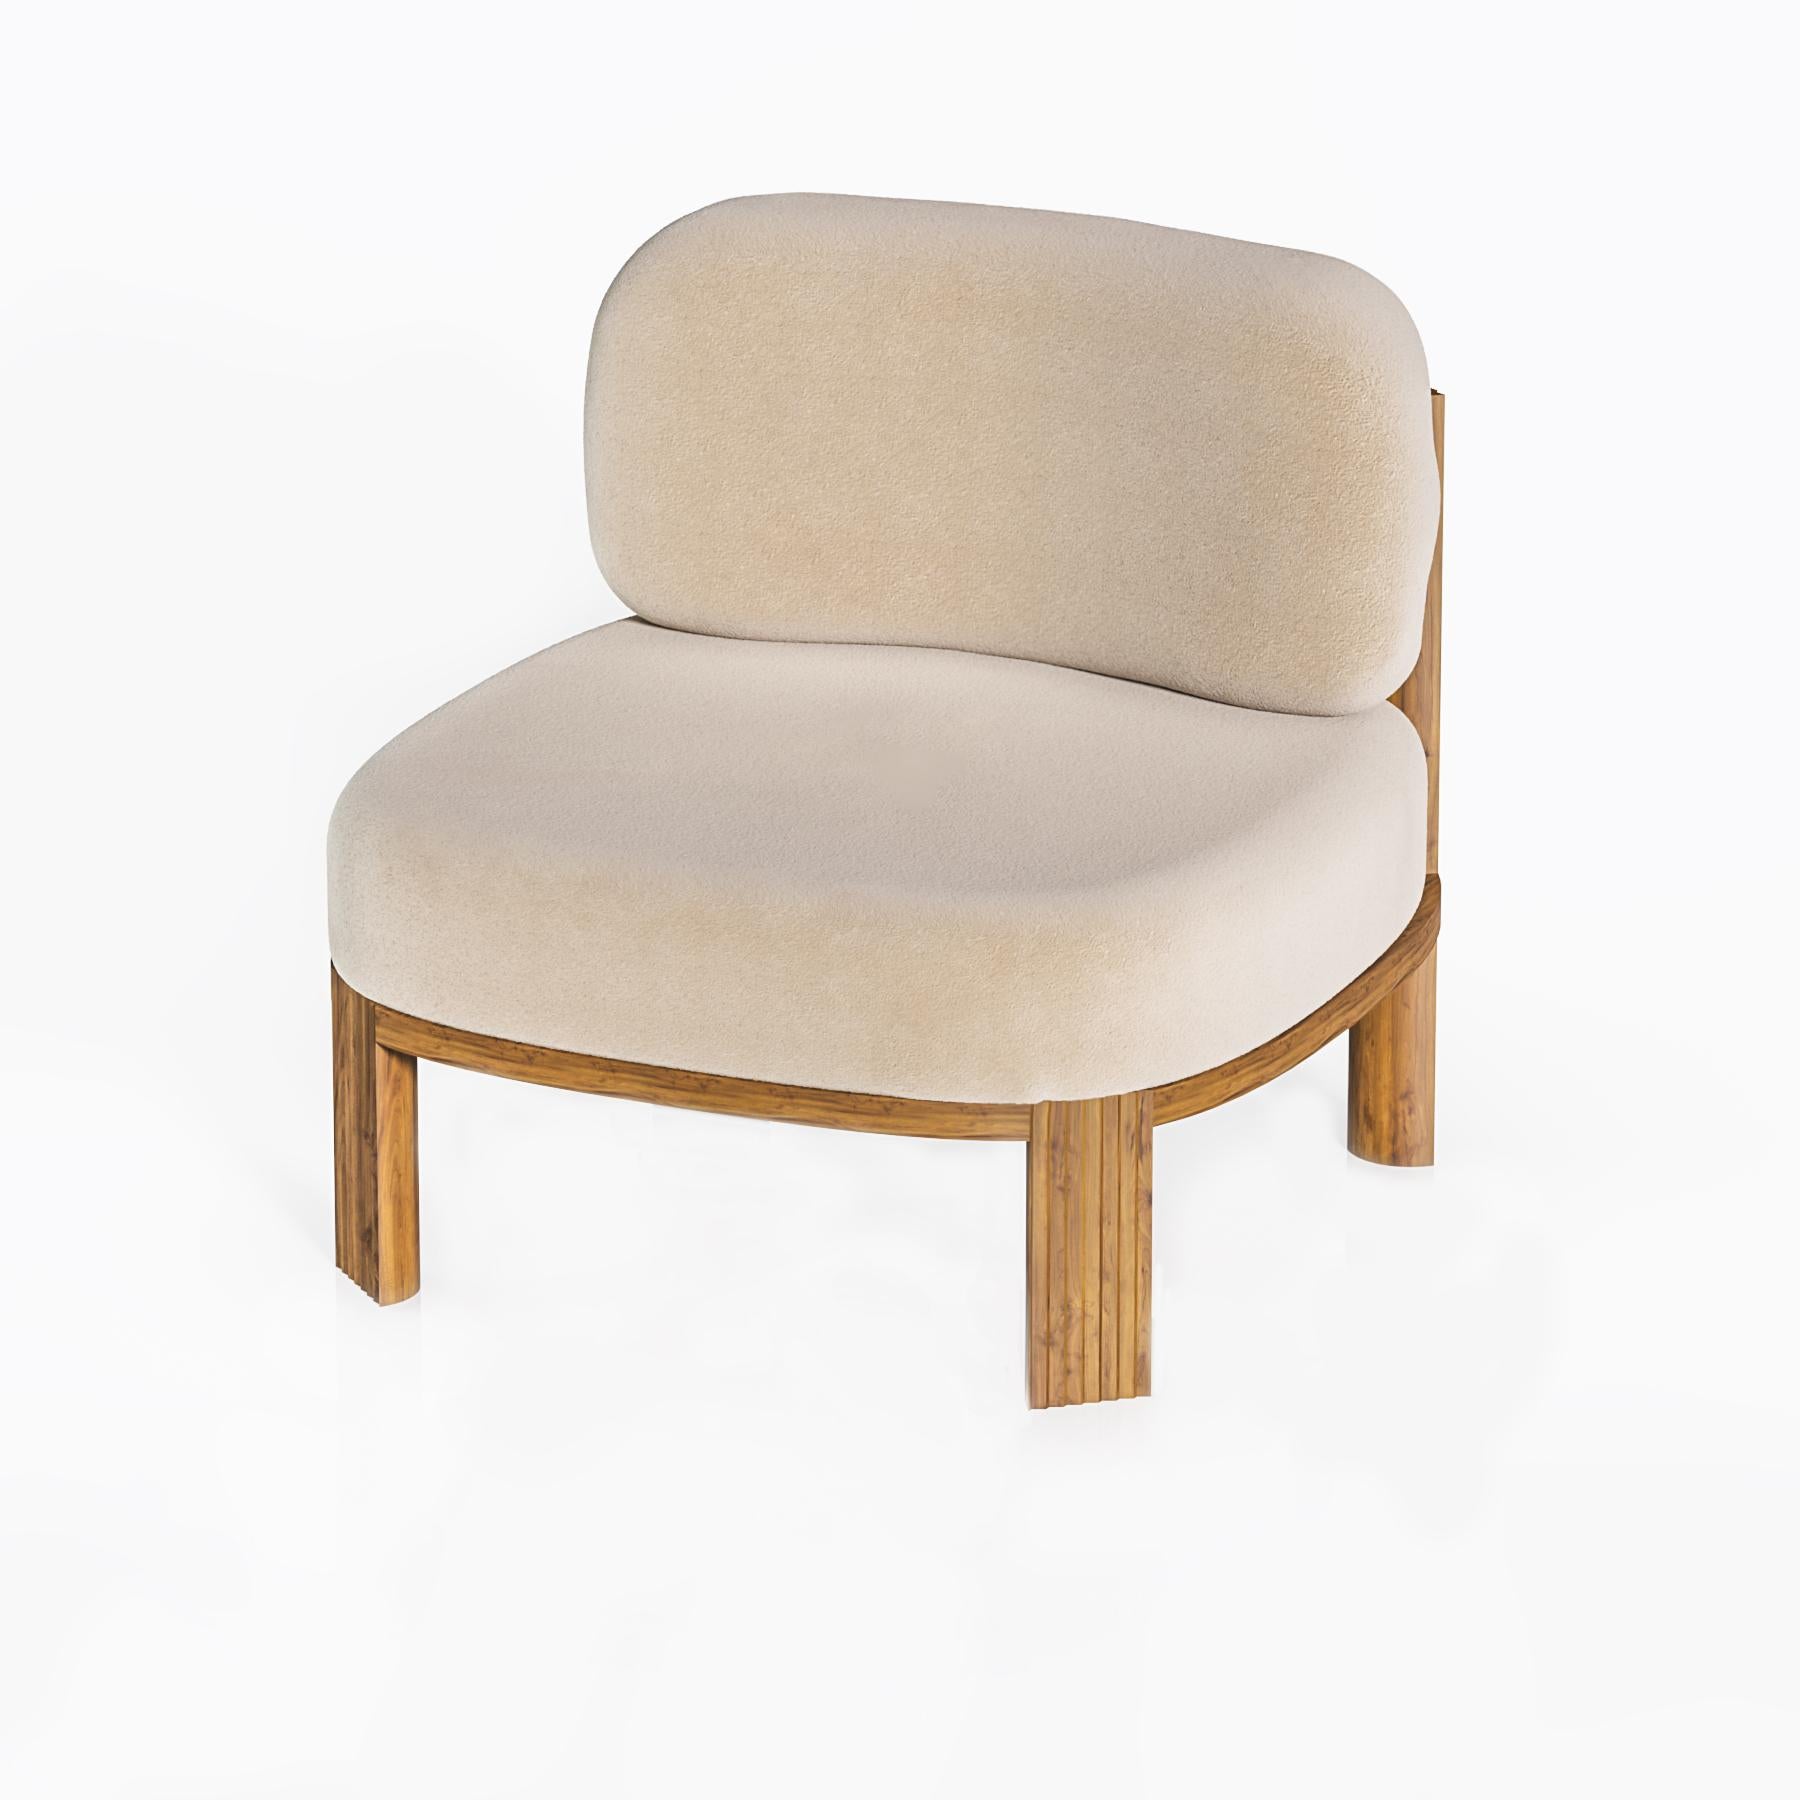 Portuguese Contemporary Modern European:  111 Armchair in Fabric & Oak Wood by Collector For Sale